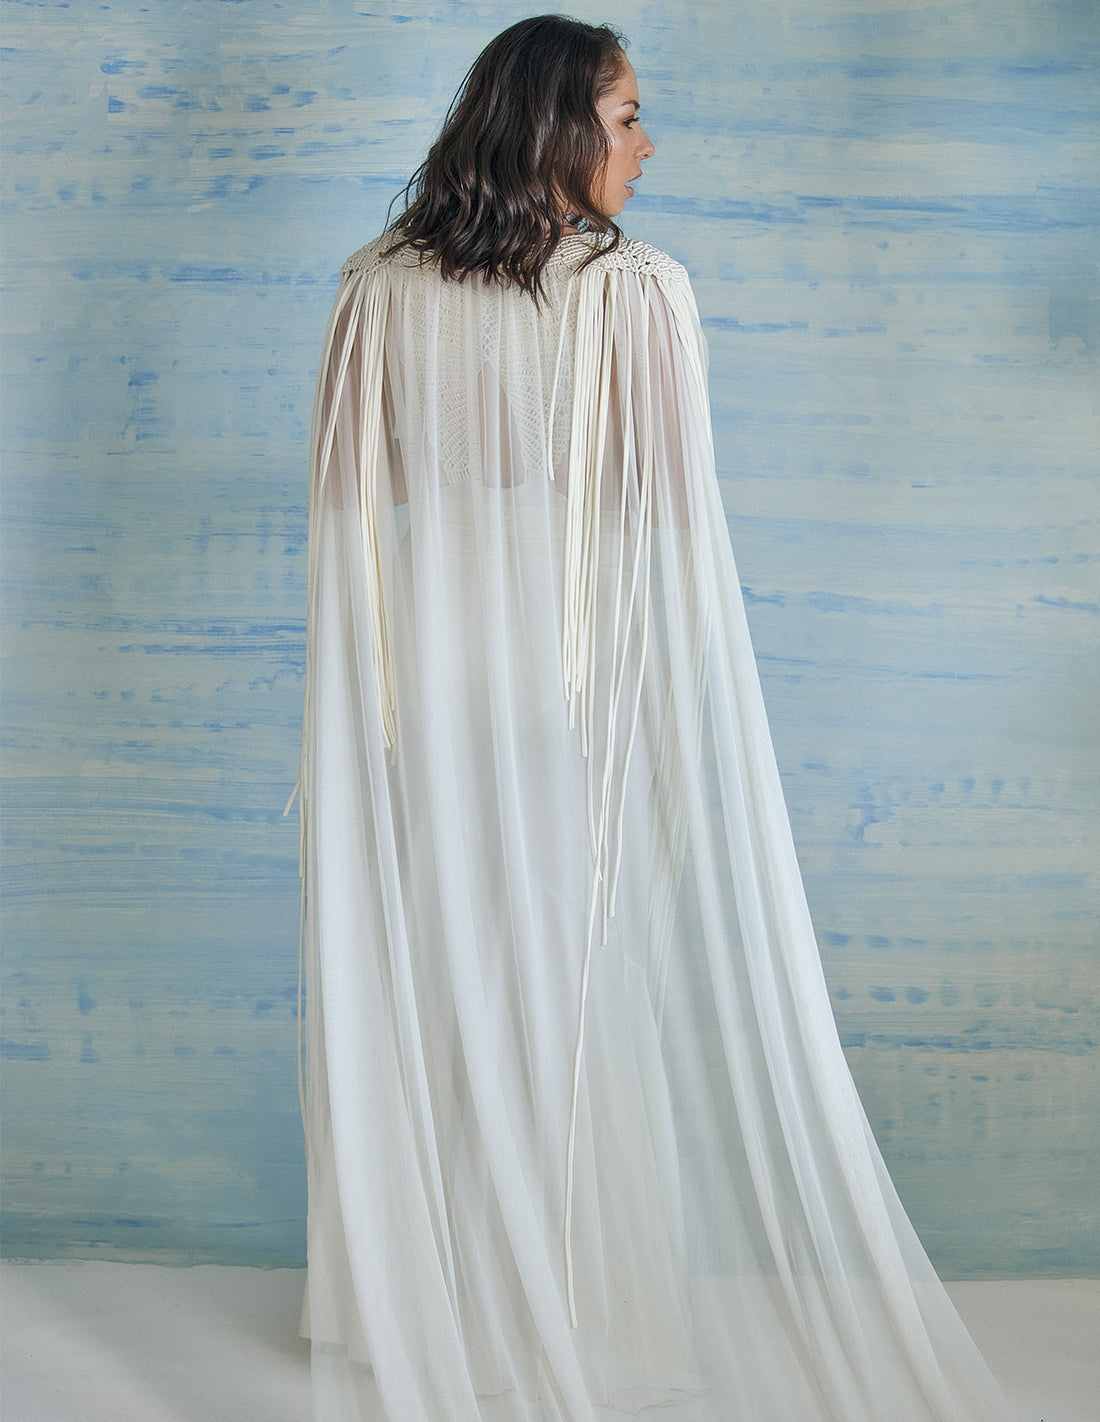 Voile Cape Ivory. Cape With Hand Woven Macramé In Ivory. Entreaguas